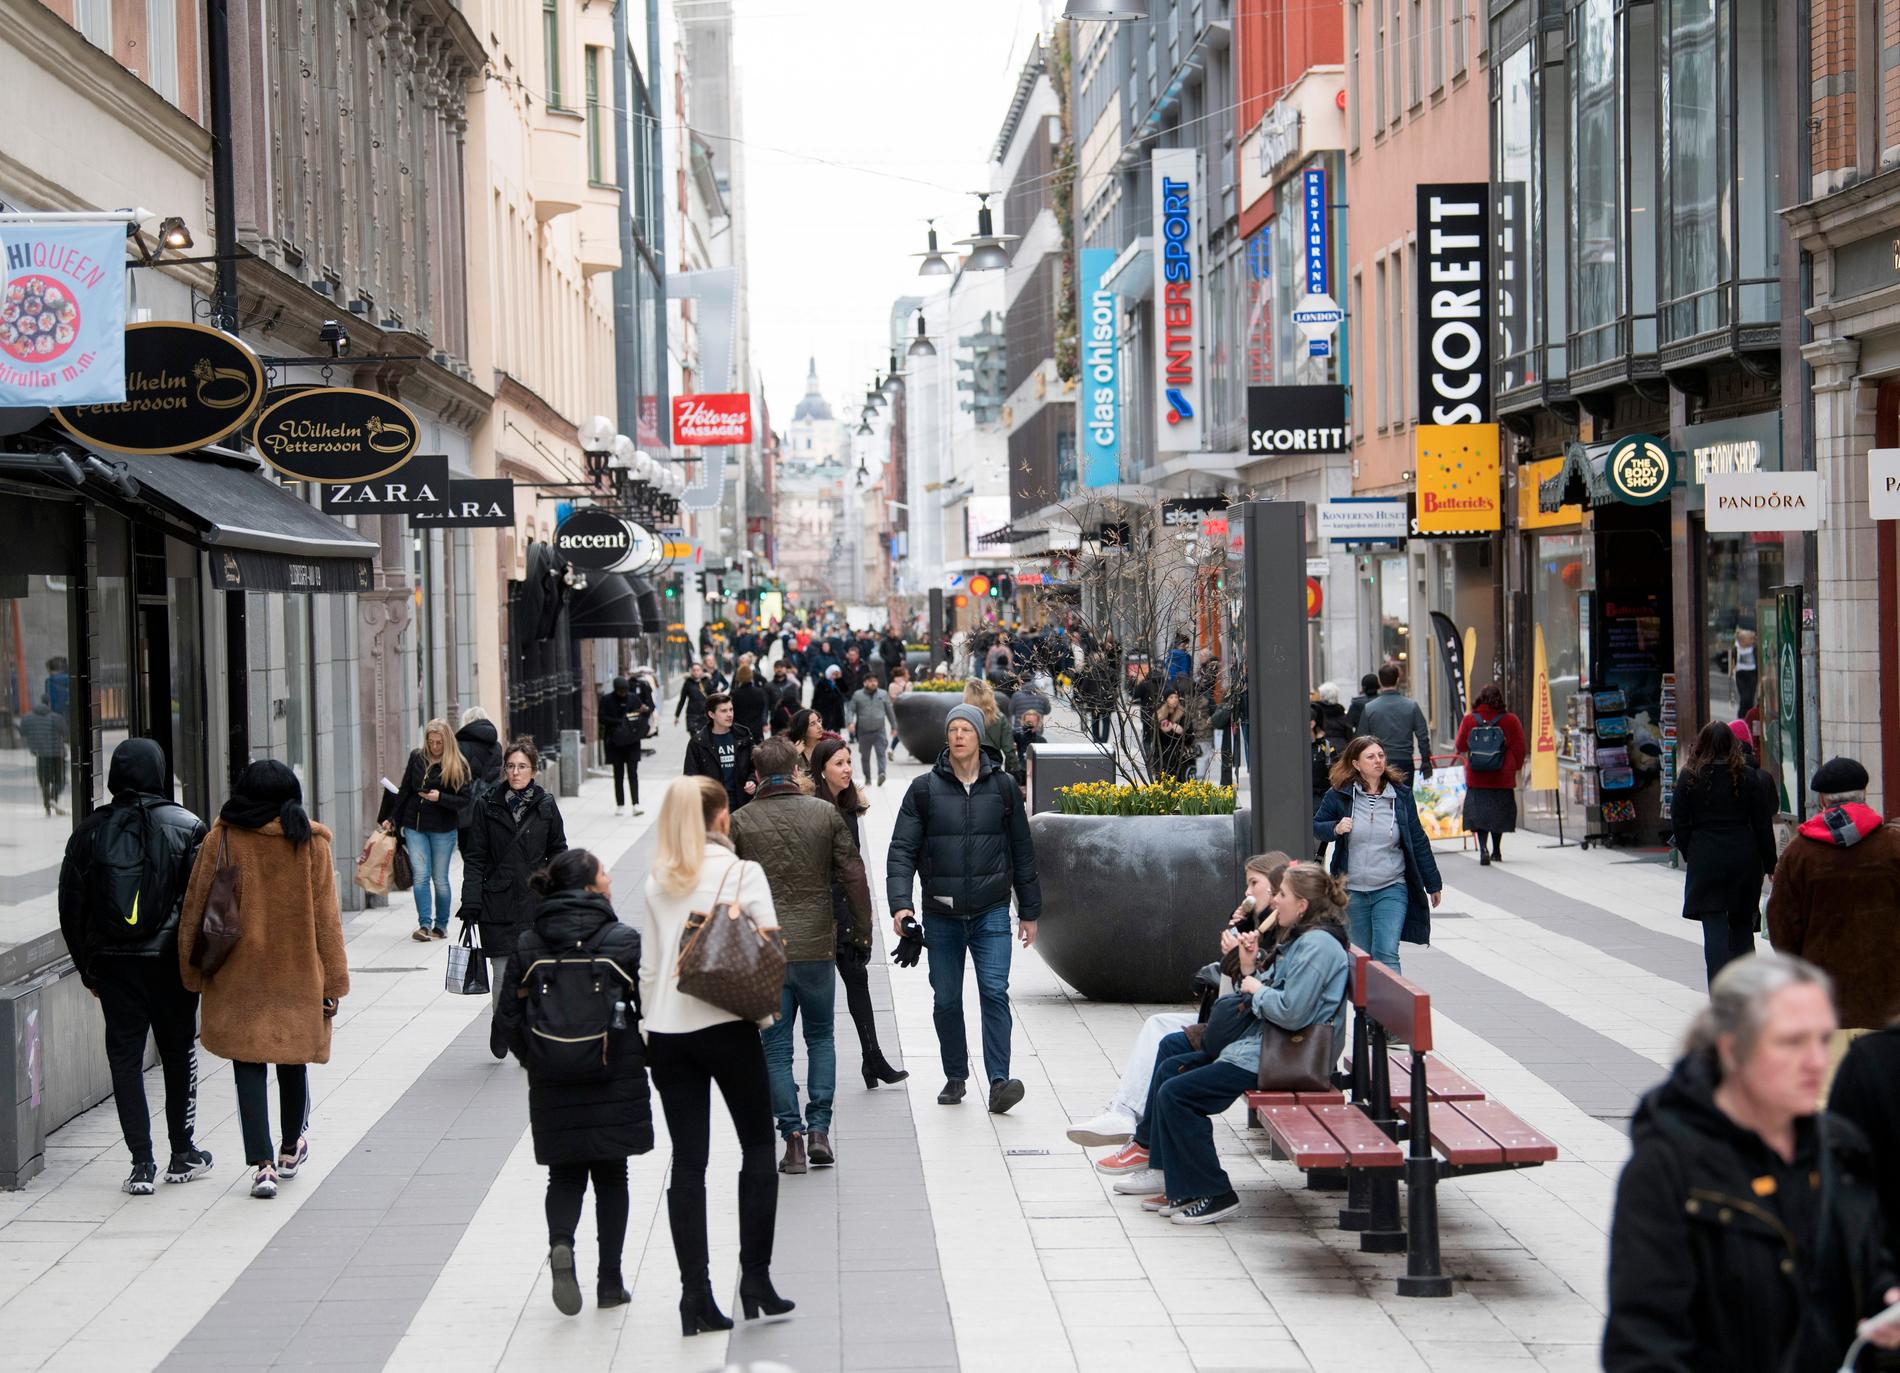 While there are fewer people than usually (pre-corona) on Drottninggatan in central Stockholm, life goes on. 